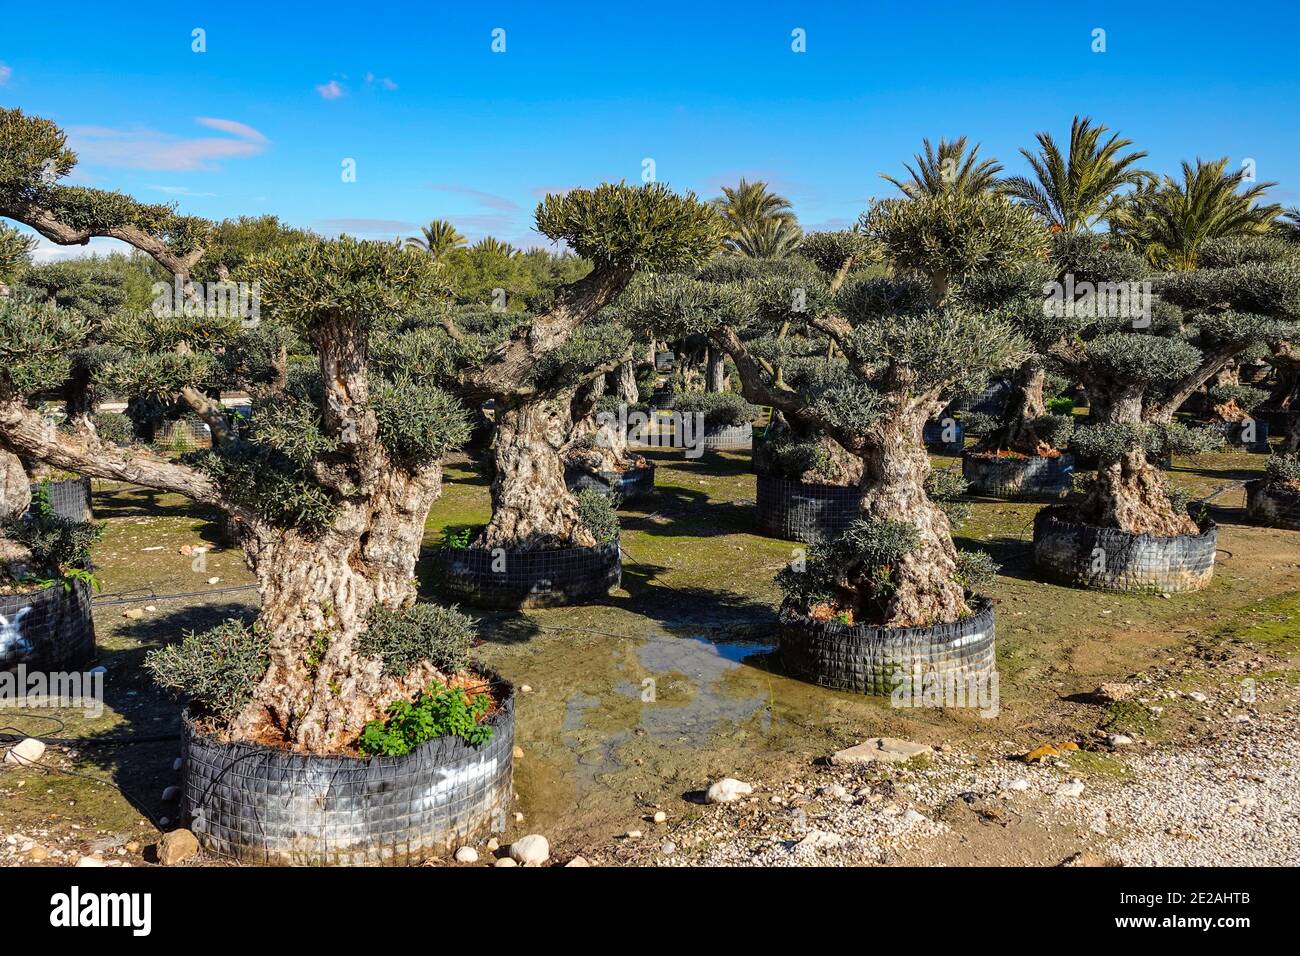 Nursery for growing olive trees in an extensive flat agricultural area, garden centre near Elche, Costa Blanca, Spain Stock Photo